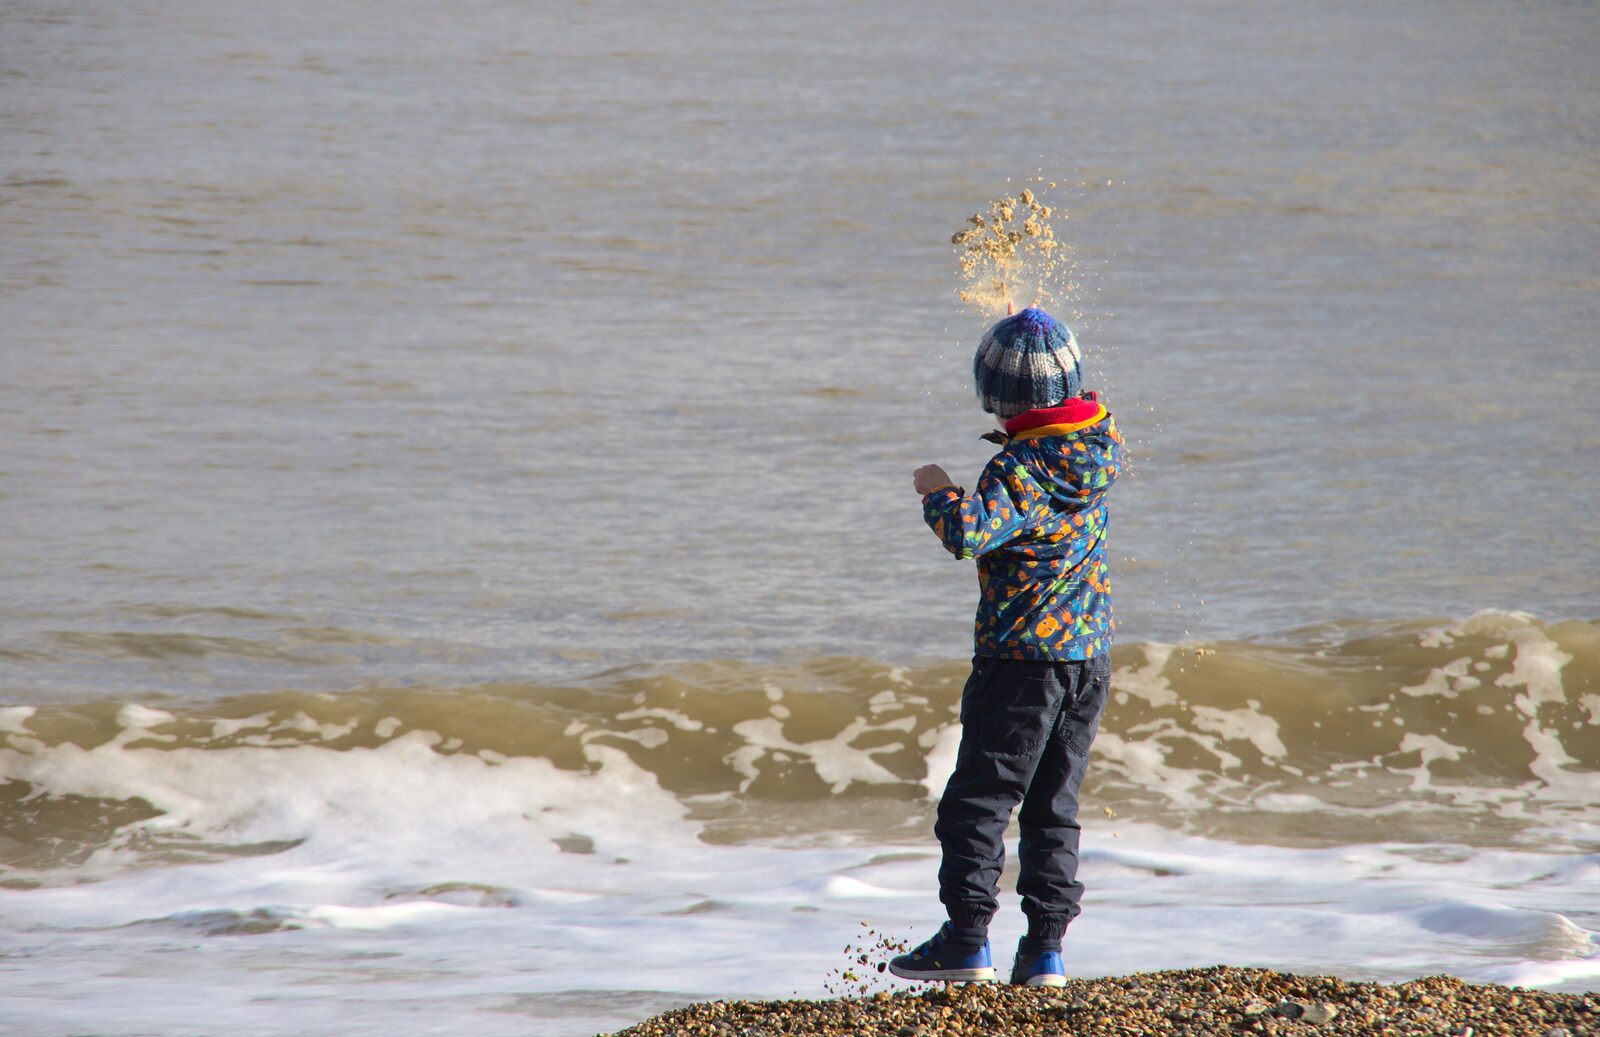 Harry flings sand at the sea from A Trip to the Amusements, Southwold Pier, Southwold, Suffolk - 5th November 2017